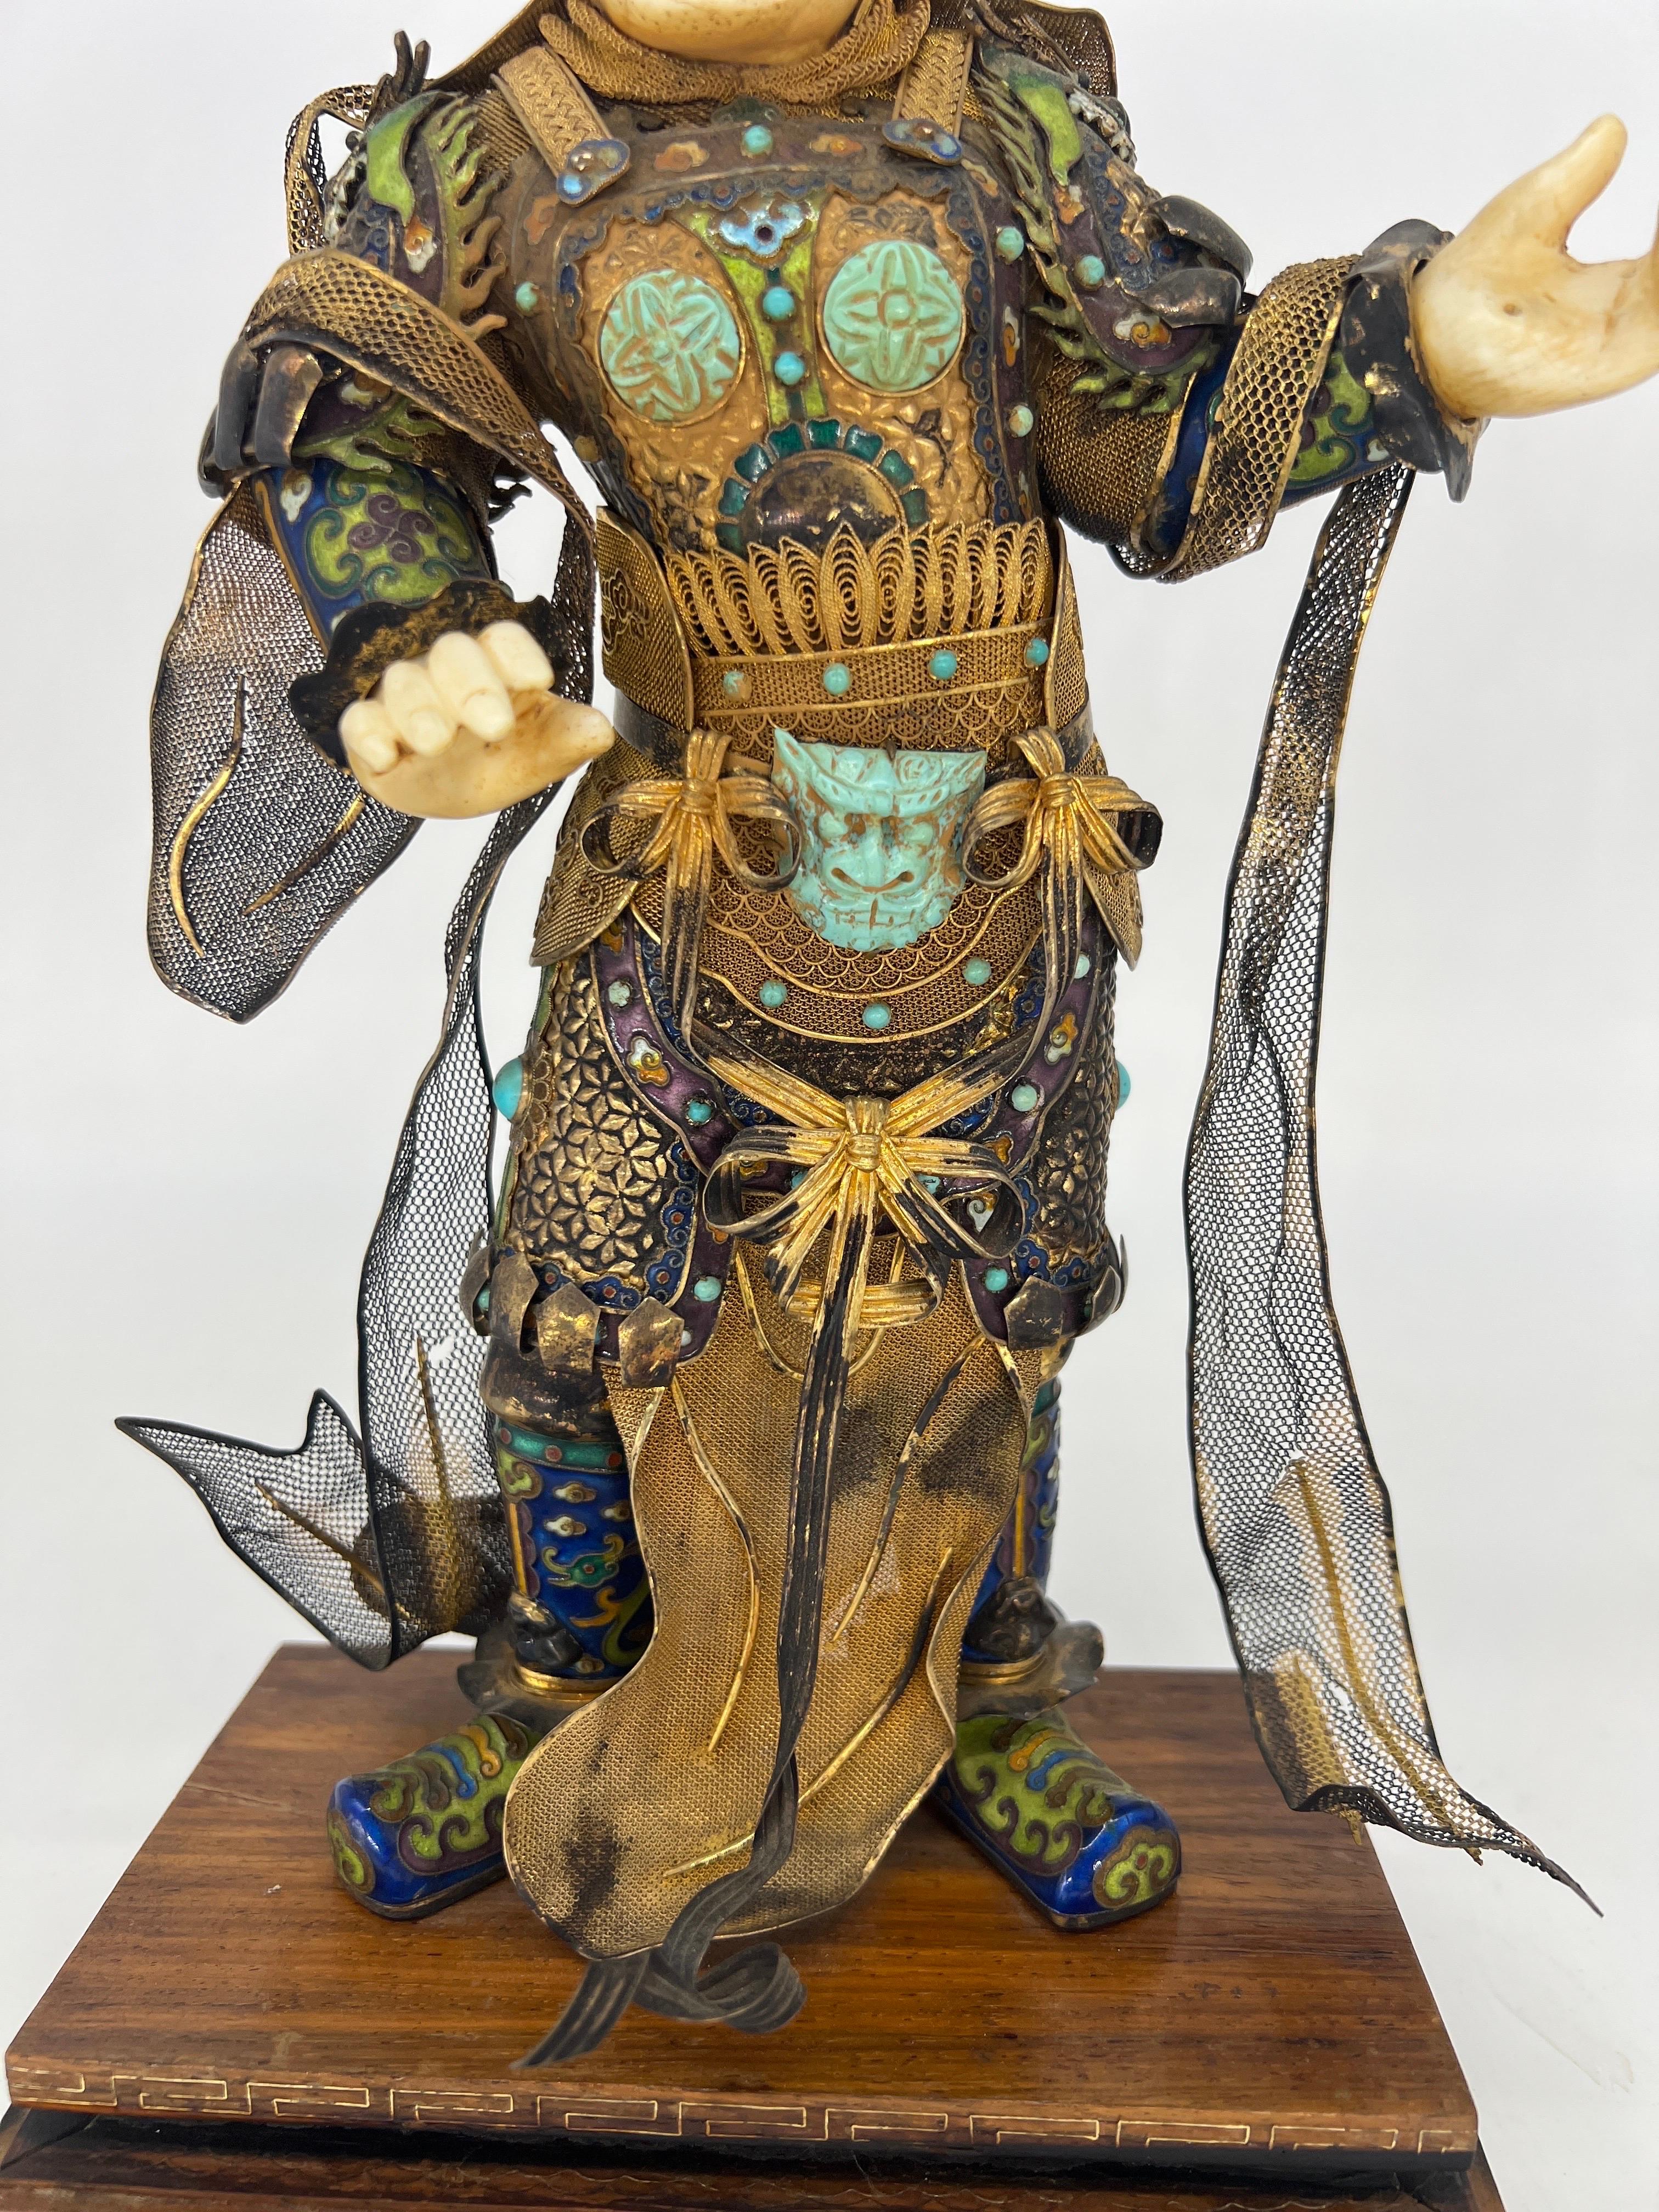 Antique Chinese Silver Gilt, Enamel & Turquoise Mounted Immortal Figurine In Good Condition For Sale In Atlanta, GA